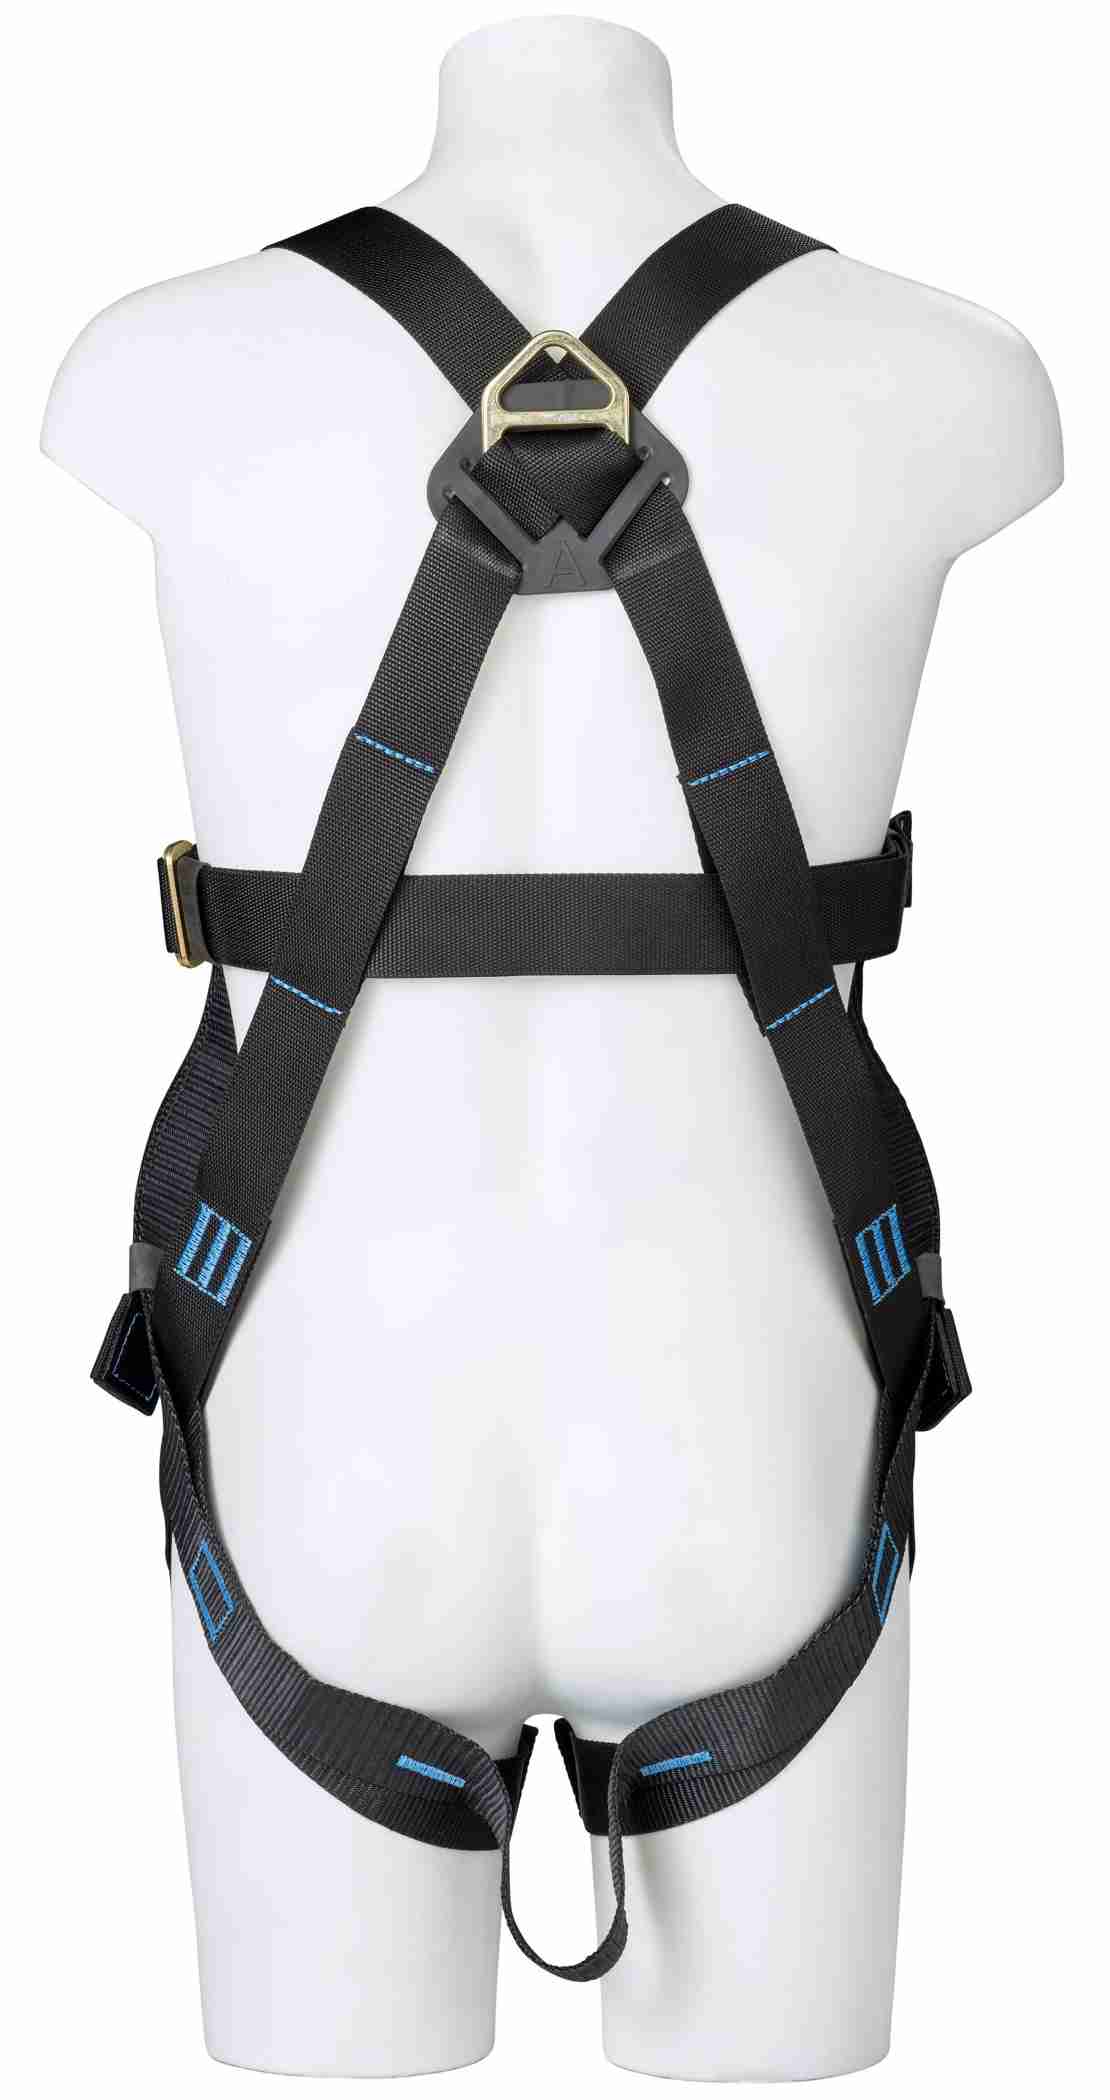 P+P Safety Quick Fit FRS Fall Arrest Harness 90299MK2 - SecureHeights